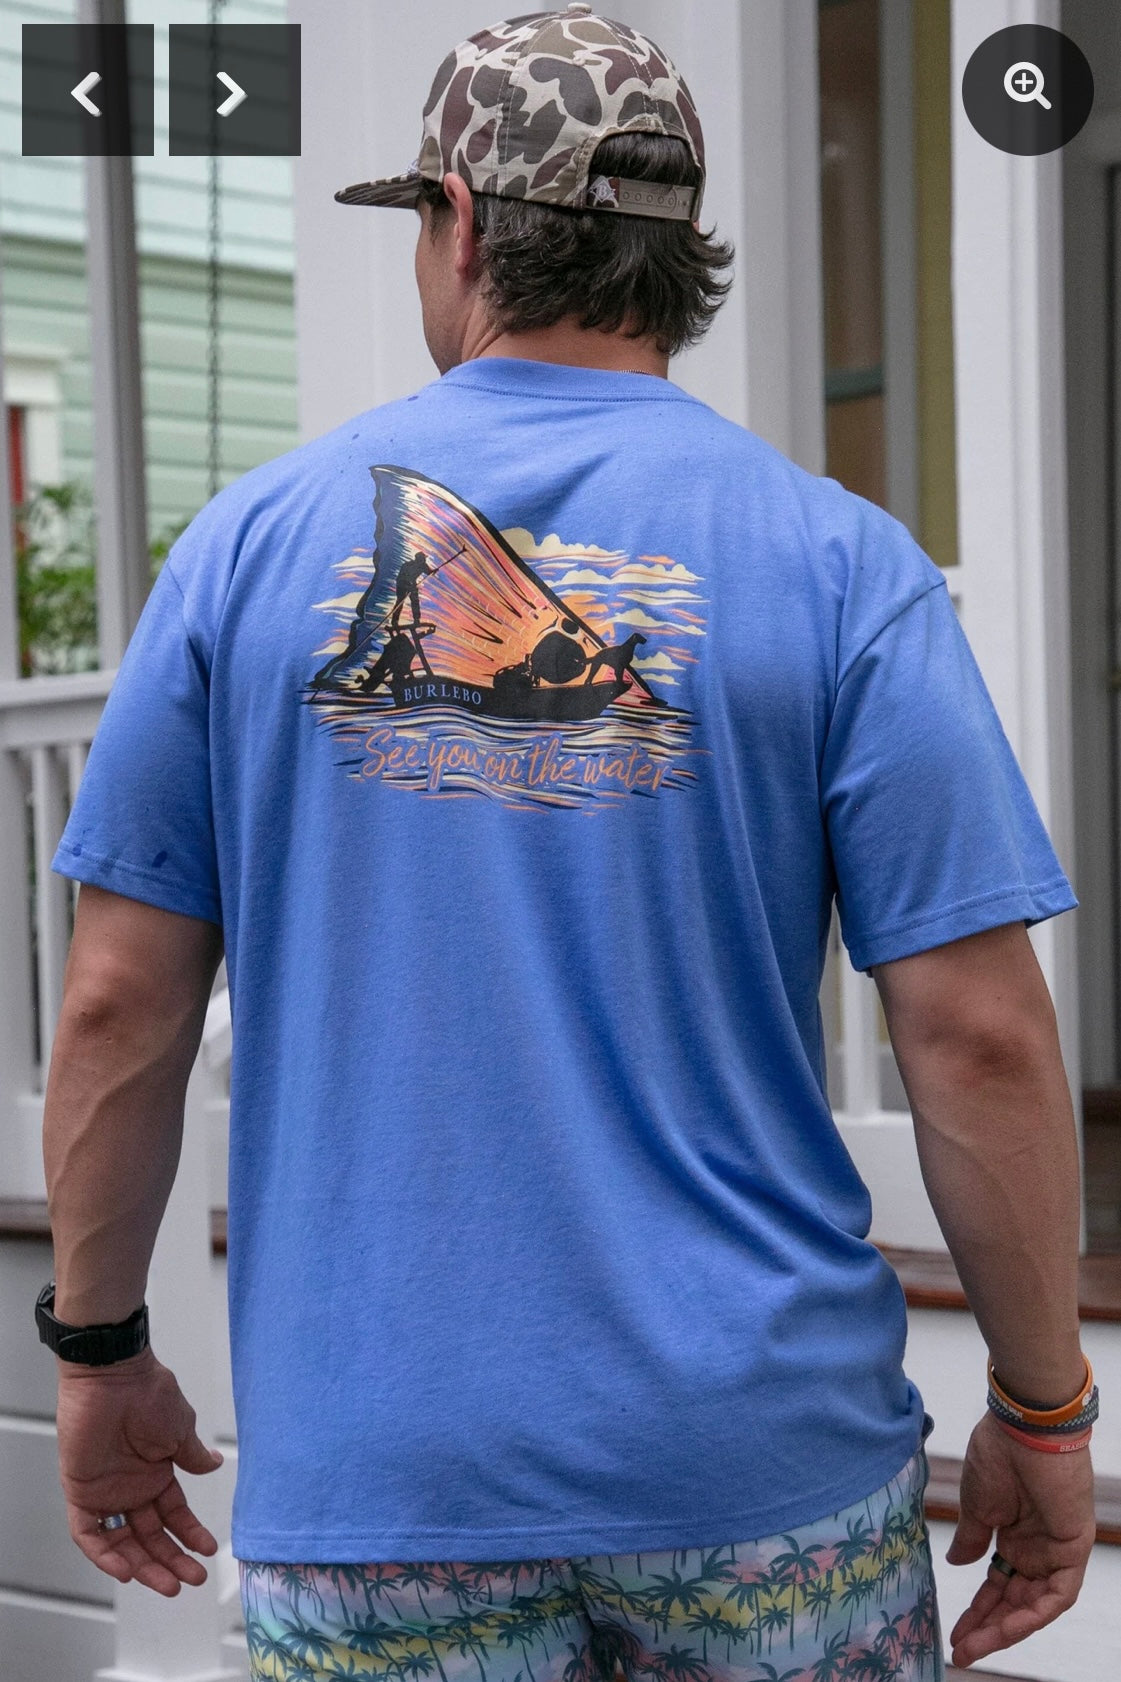 Burlebo's See You on the Water t-shirt